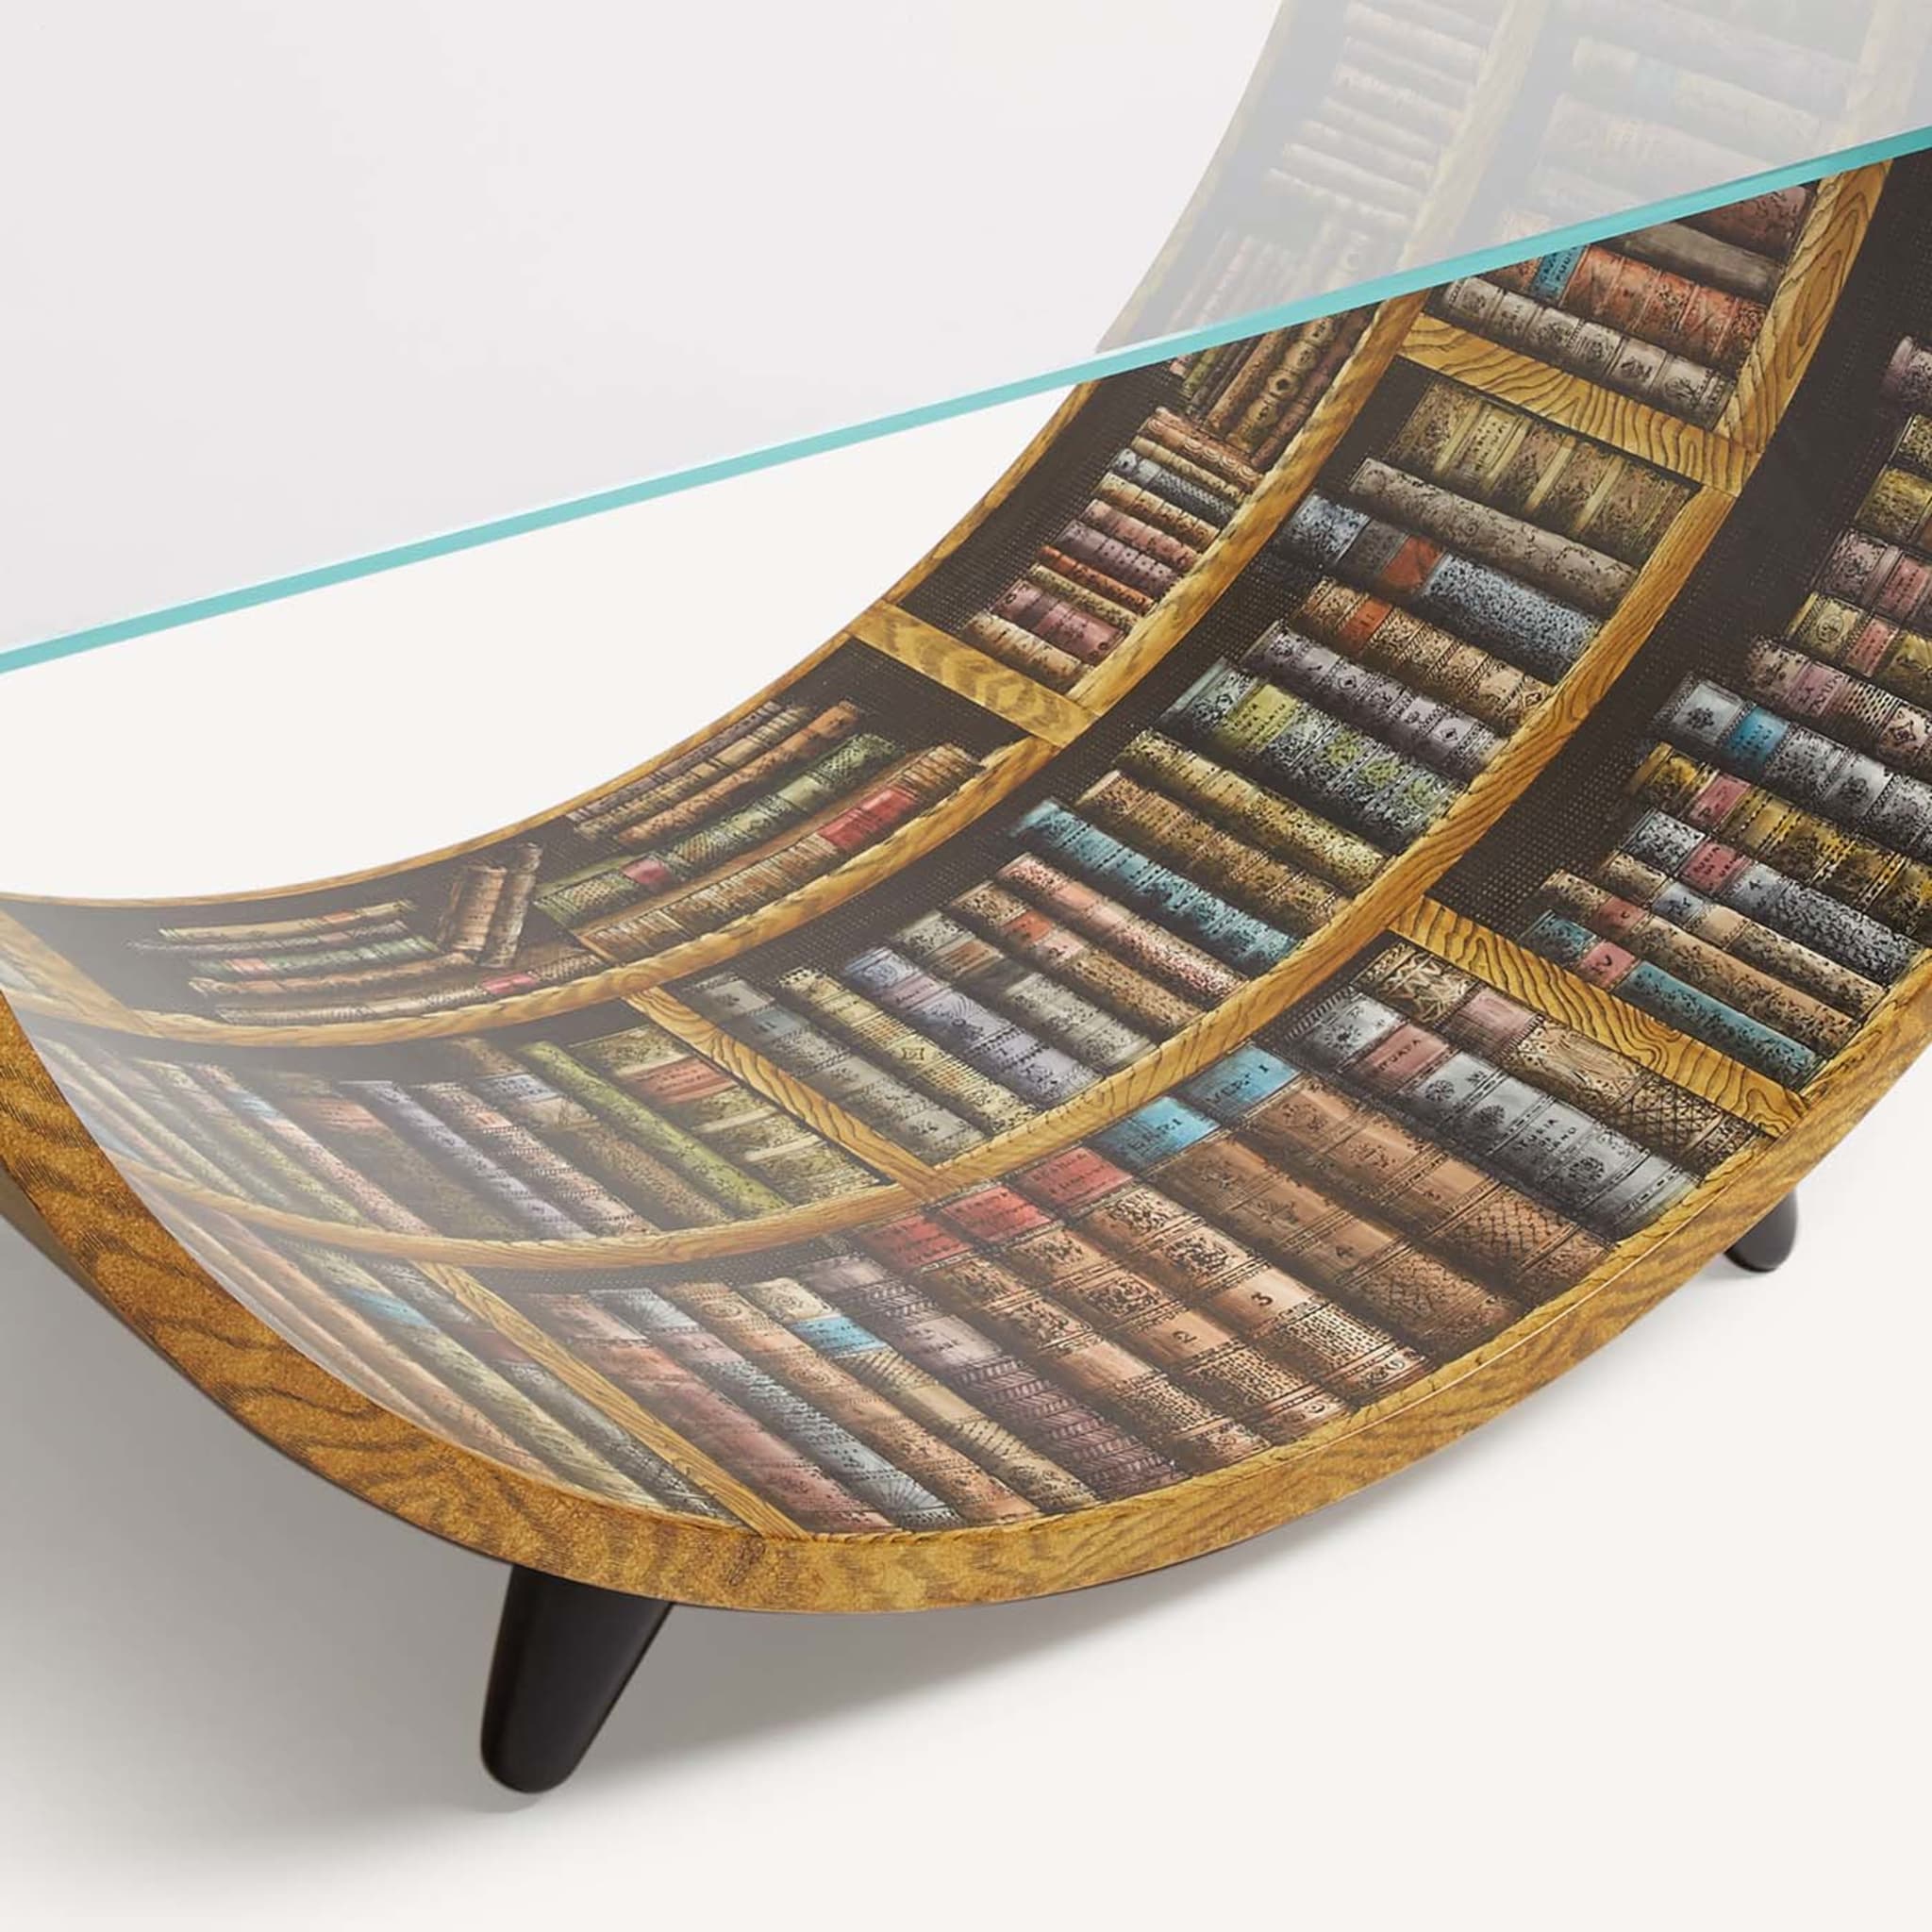 Libri Curved Low Table - Alternative view 1